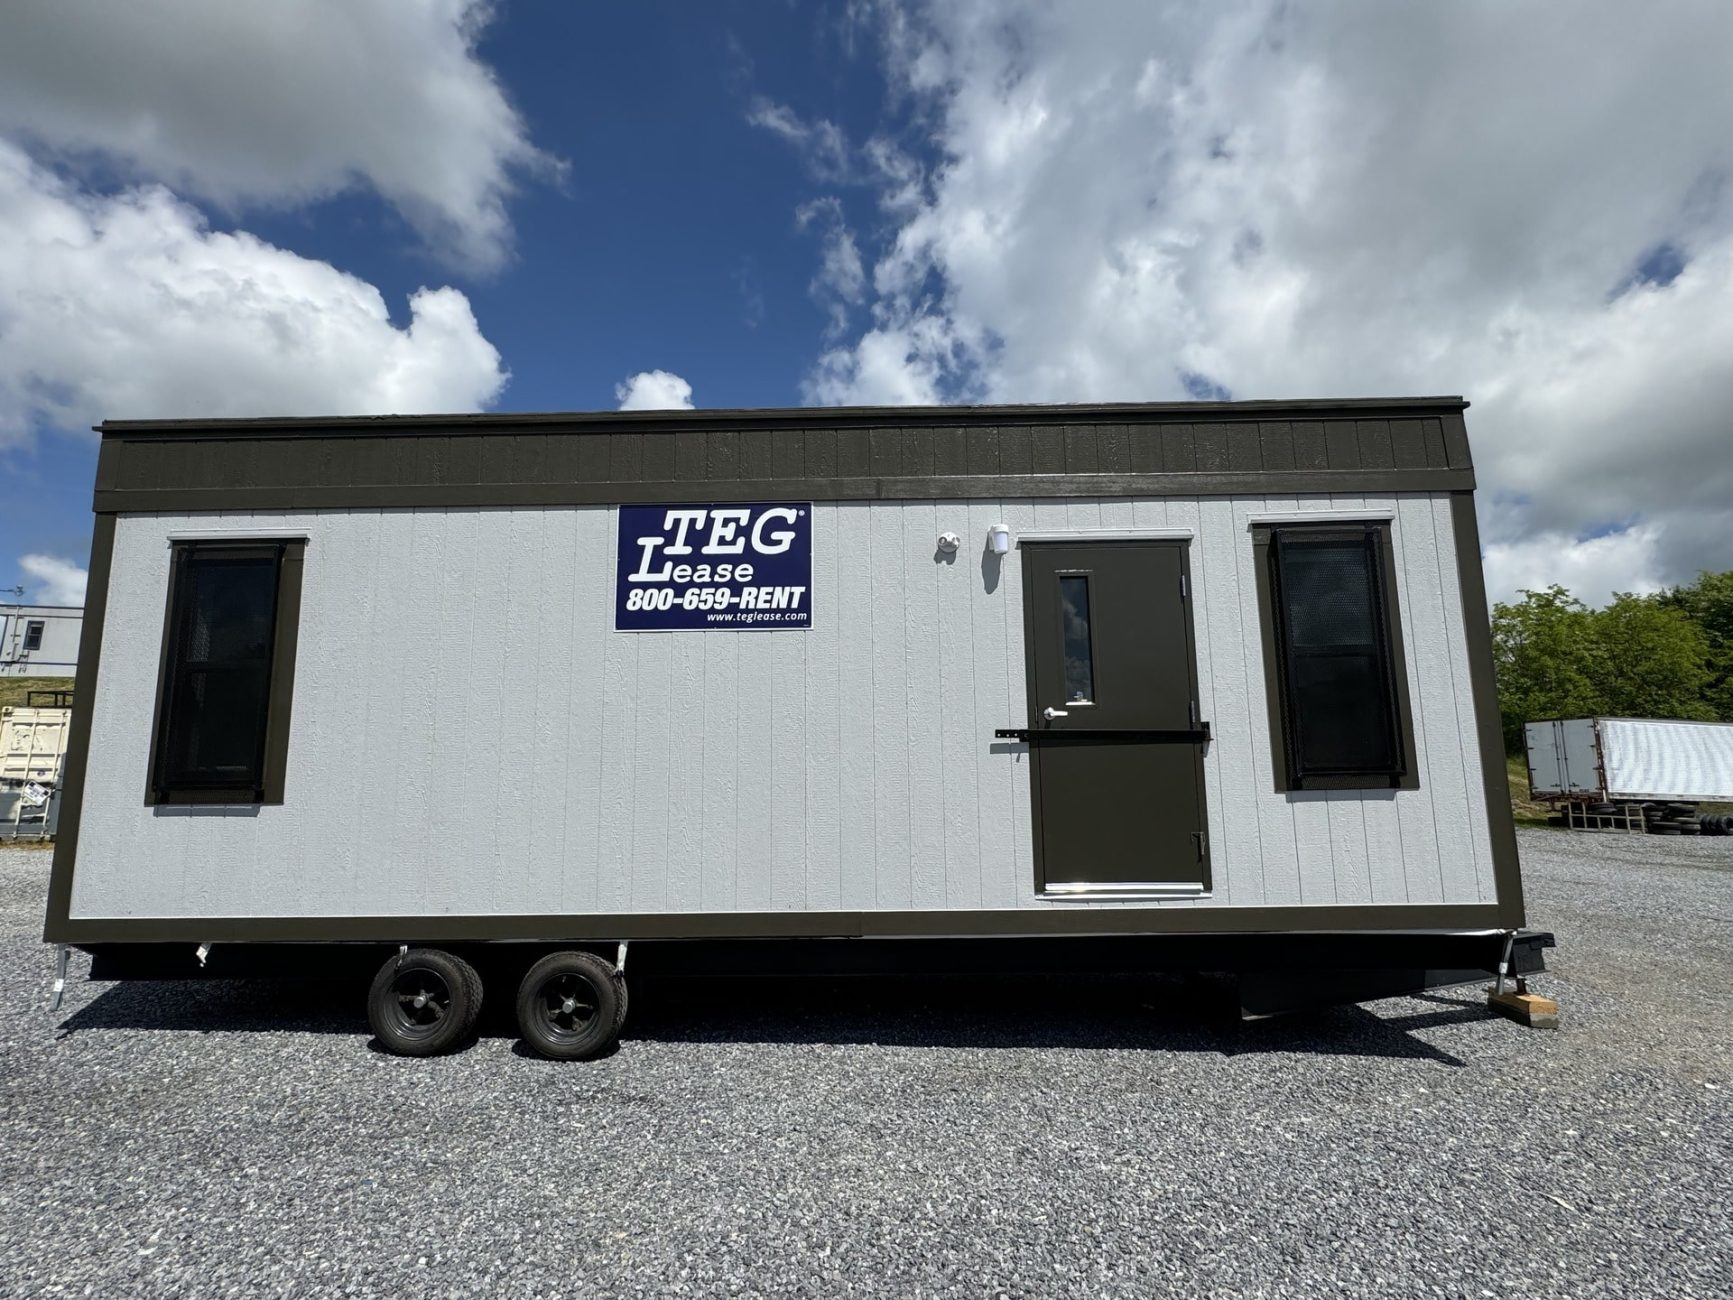 Photo #4 of Field Offices located in Johnson City, TN